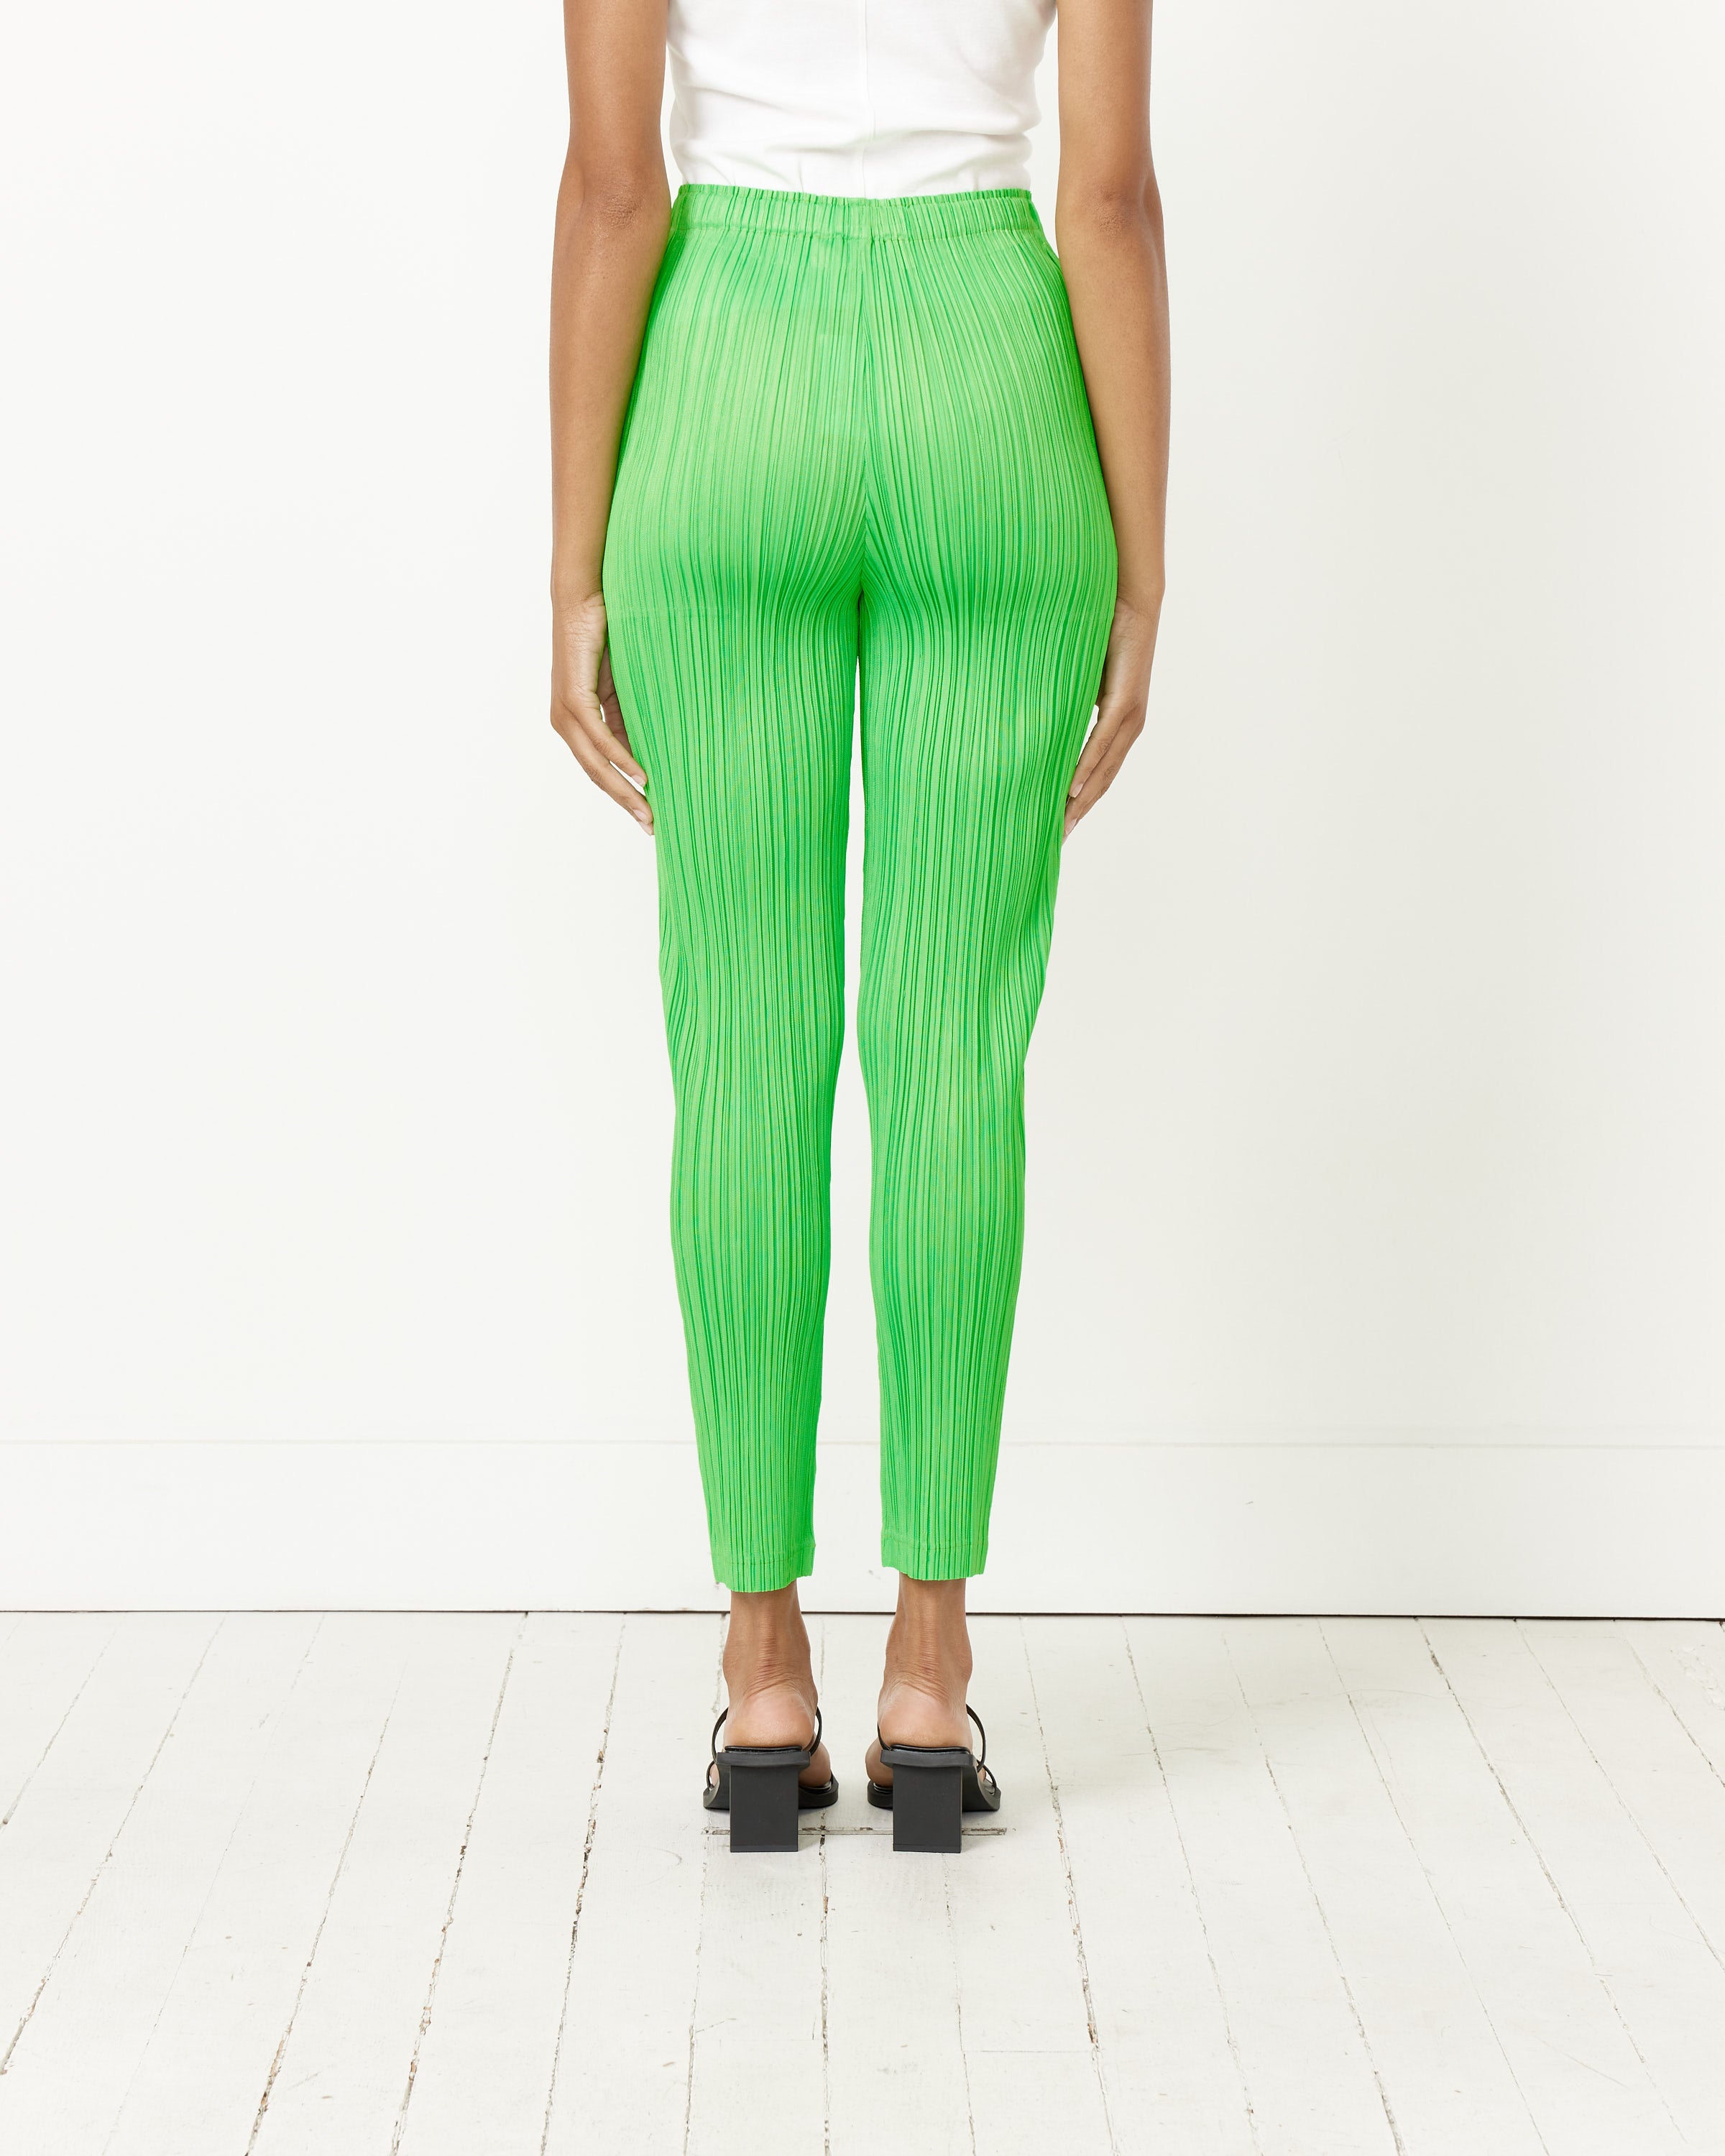 Thicker Bottoms 2 Pant in Bright Green